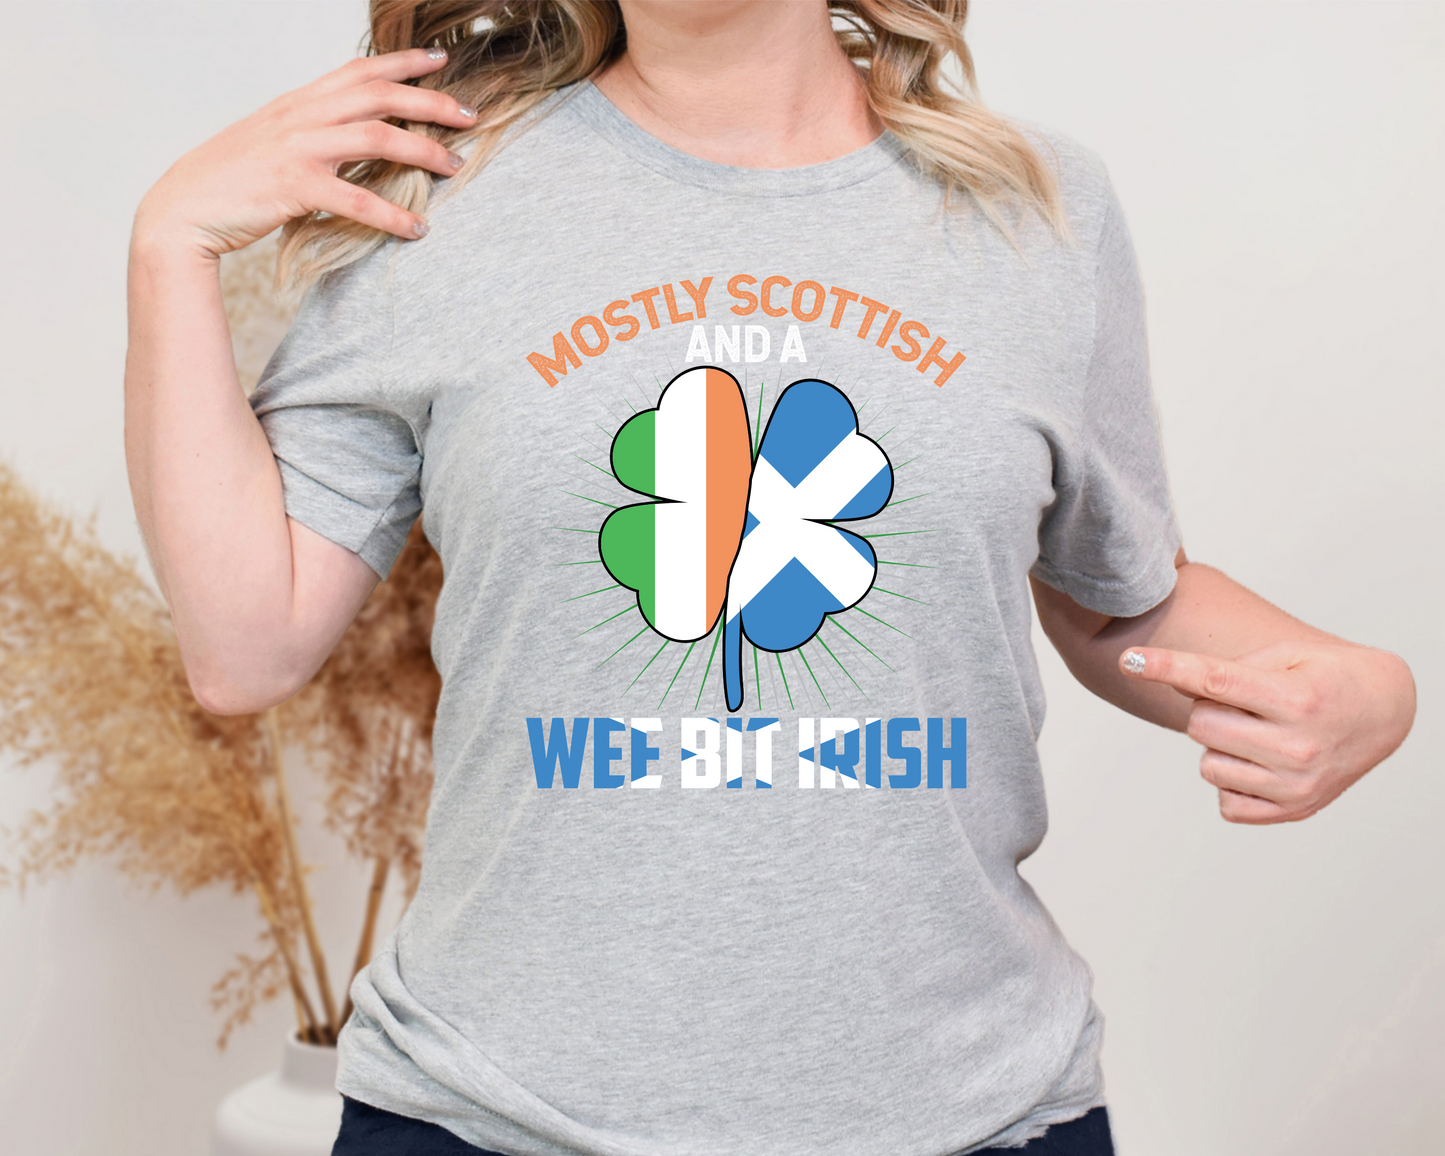 Mostly Scottish and a Wee Bit Irish St. Patrick's Day Funny Shirt